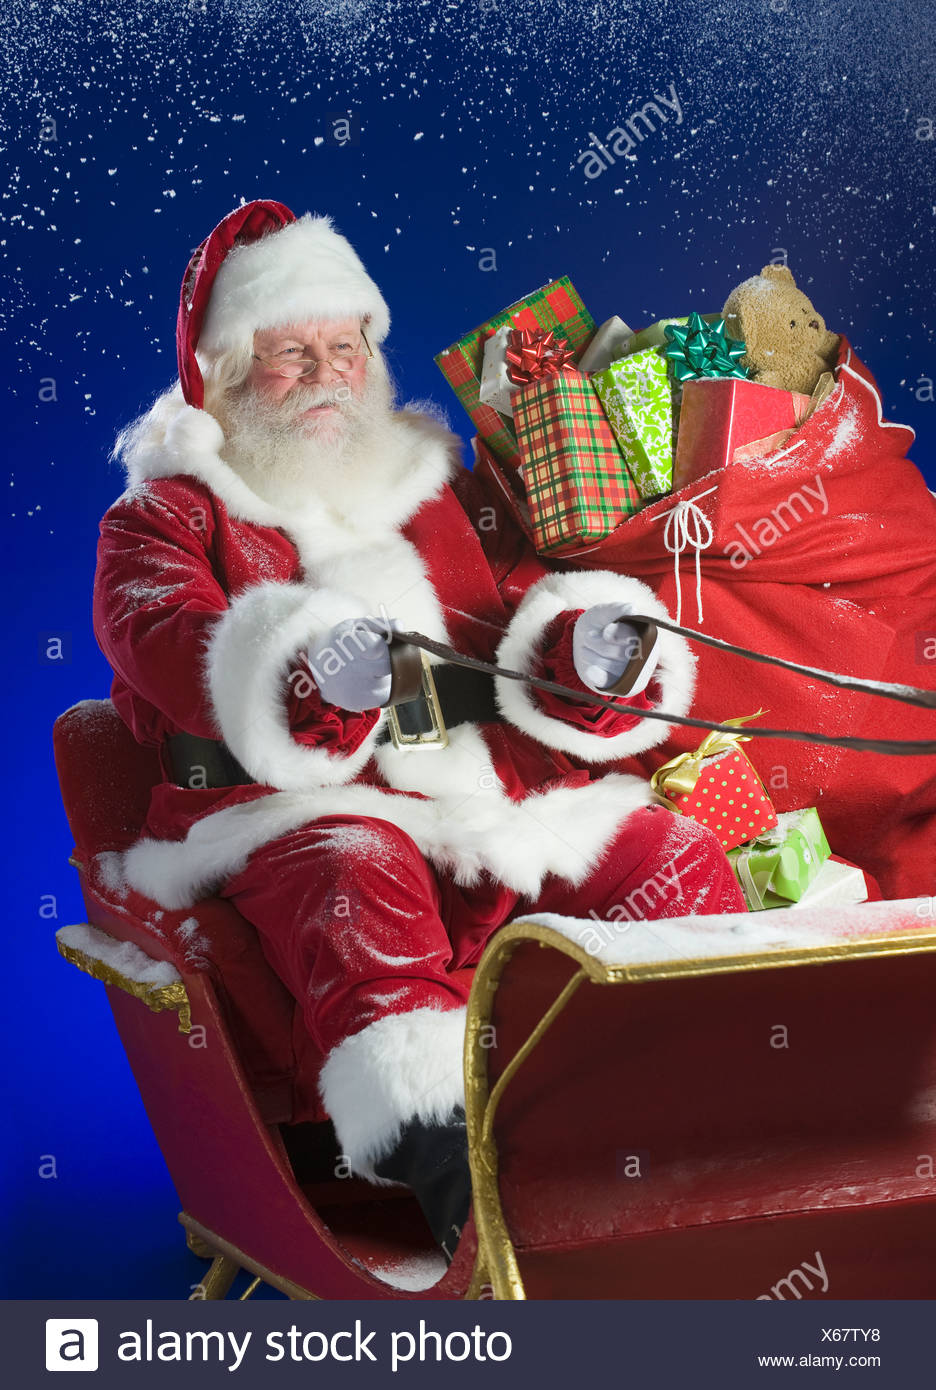 Santa Claus in sleigh with bag of toys Stock Photo ...